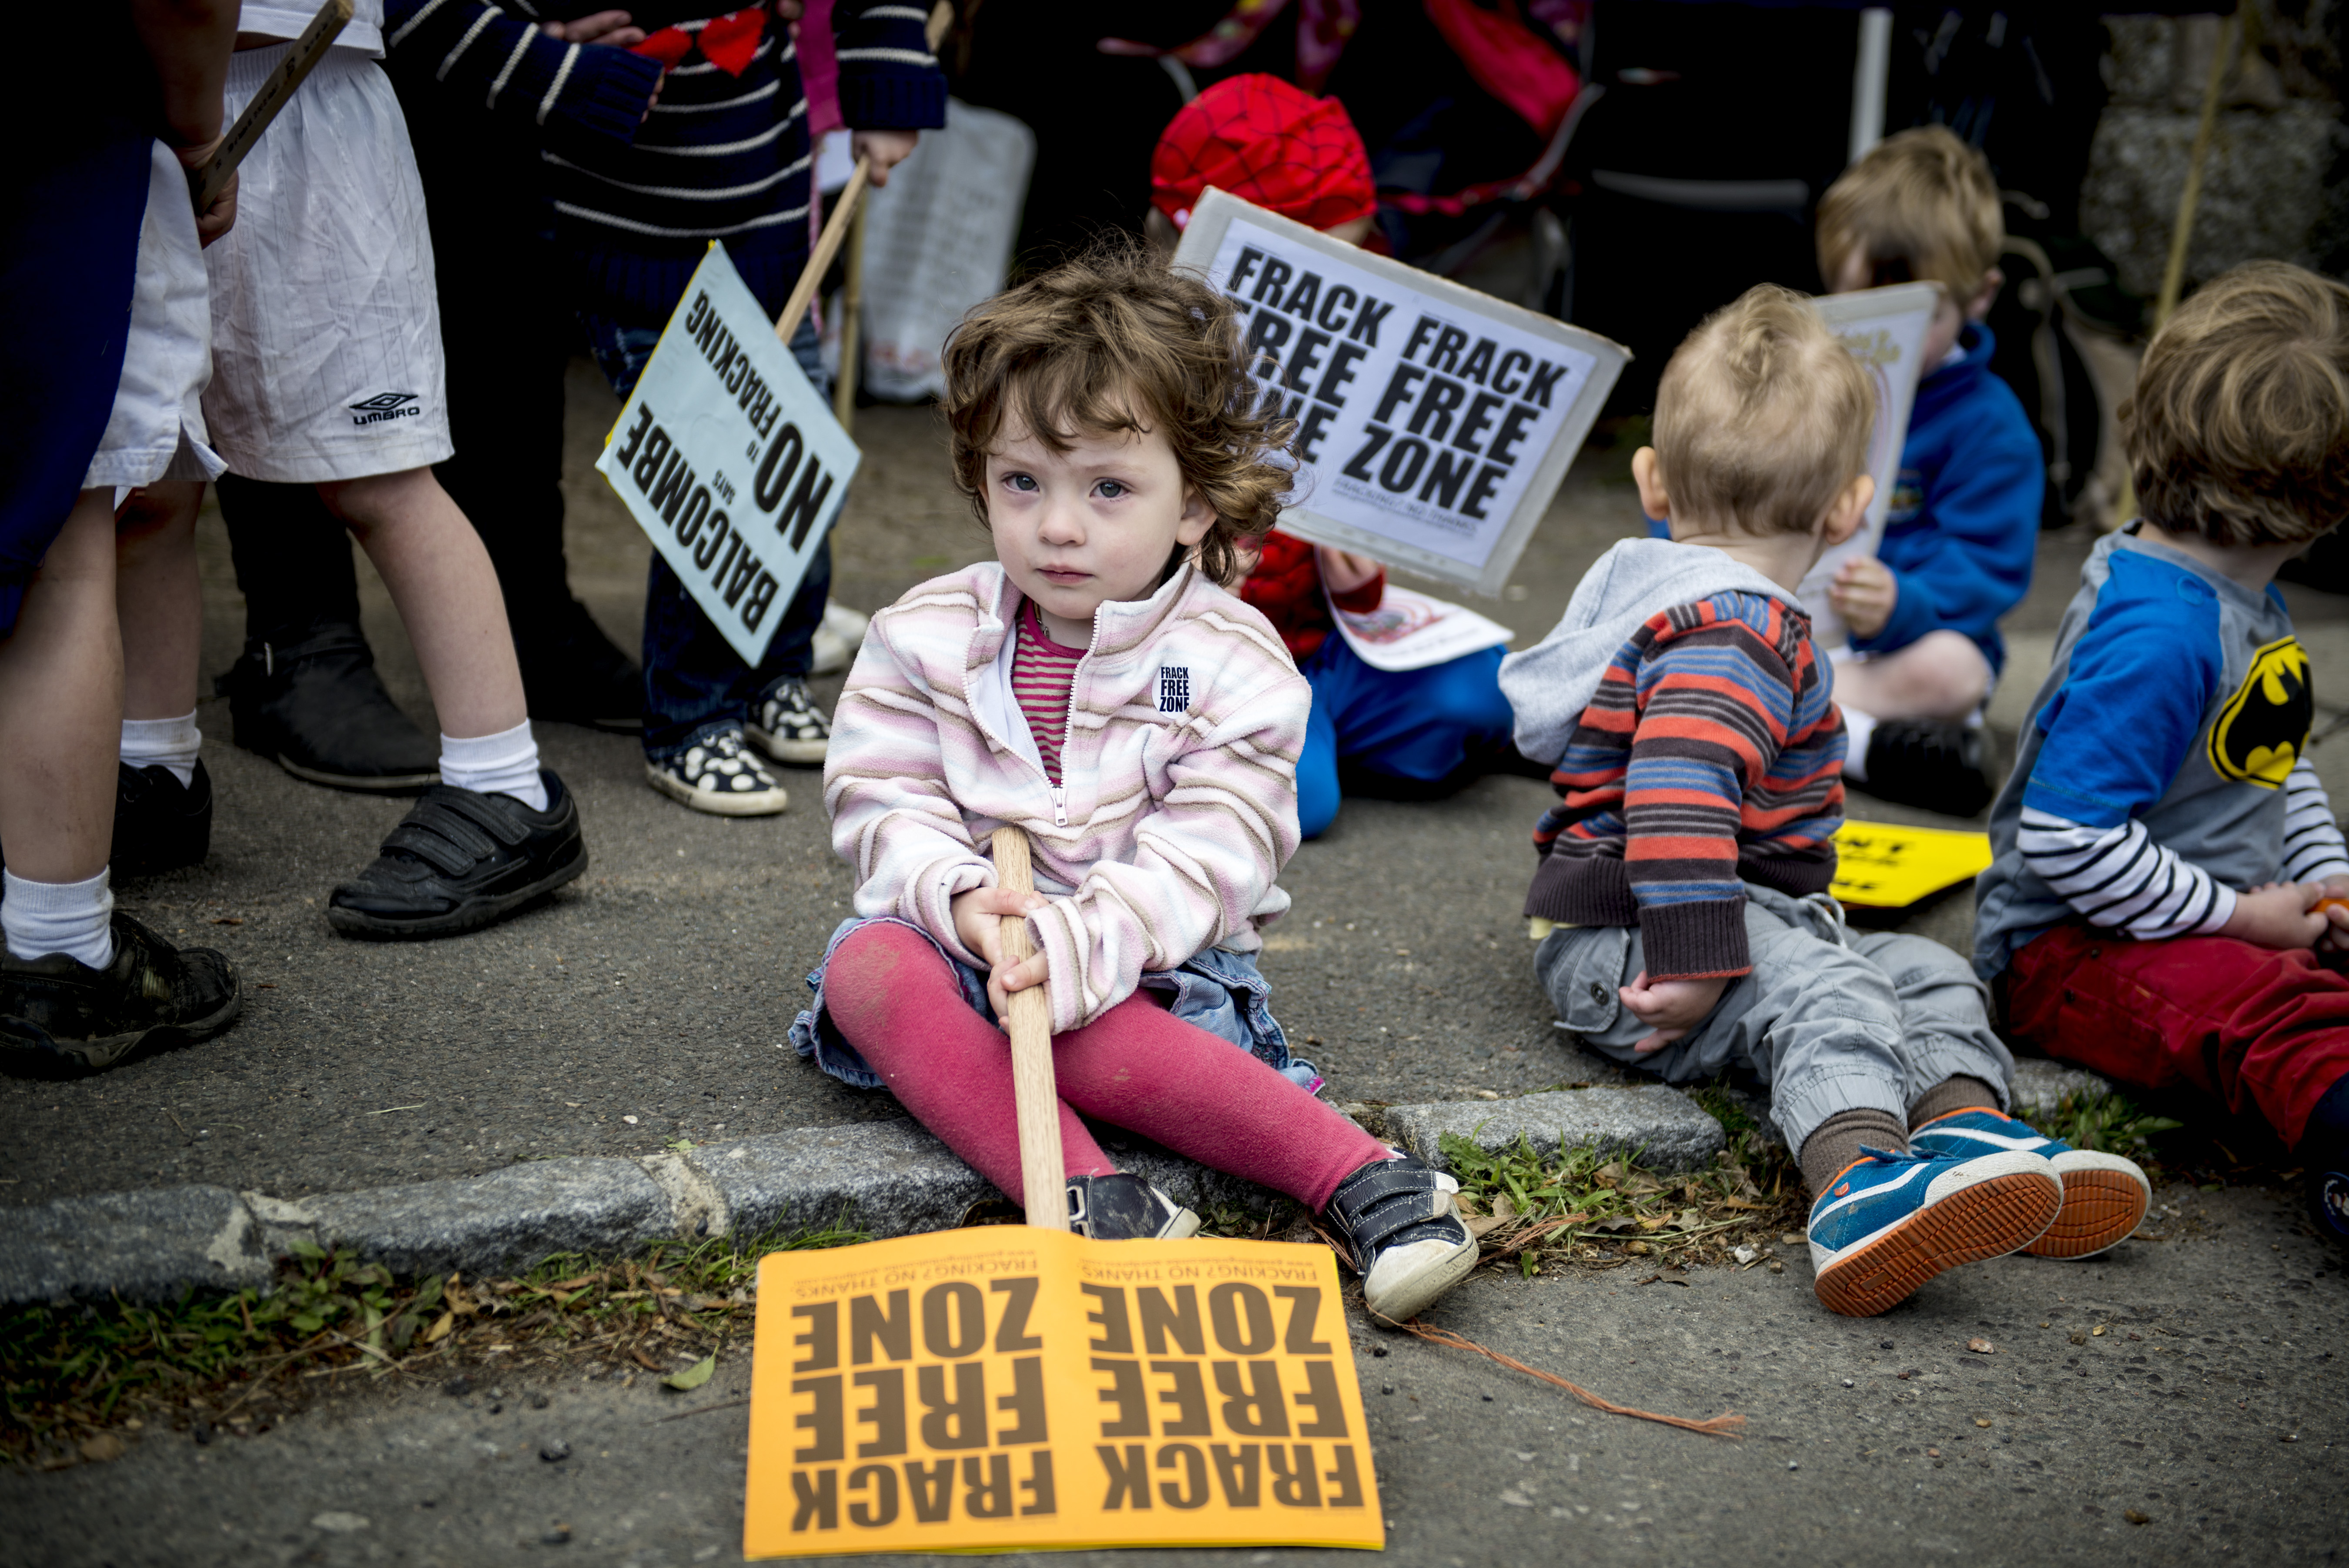 Children take part in a protest against hydraulic fracturing, commonly known as fracking, in the town of Balcombe, England, May 23, 2013. An energy company's plan to drill an exploratory shale-gas well in the bucolic area of Balcombe has galvanized residents. (Andrew Testa/International Herald Tribune)